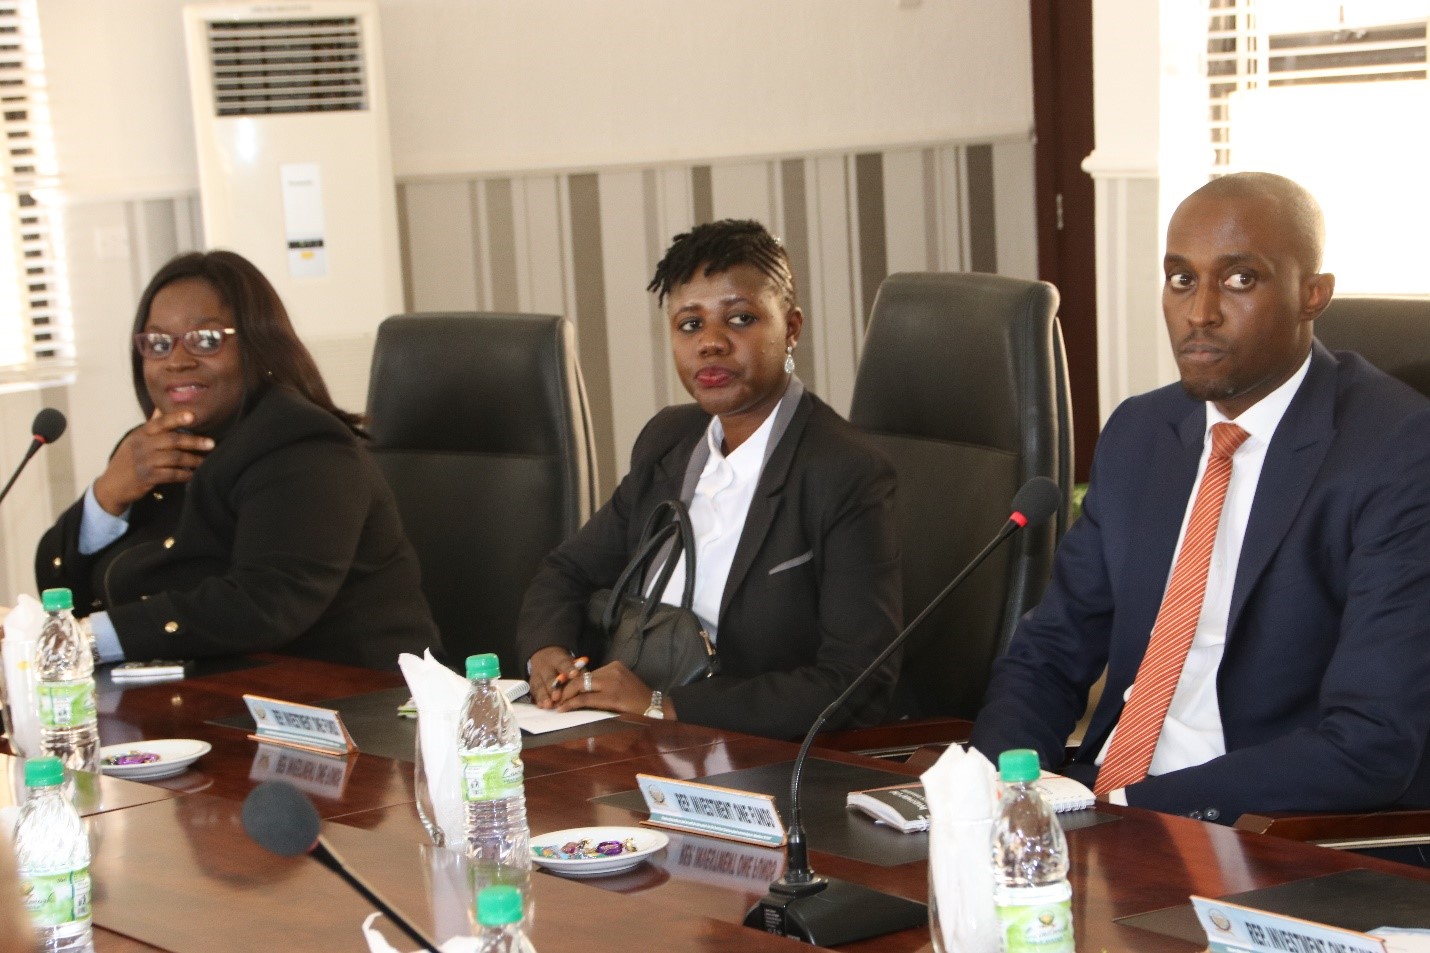 
 The IOFML team during their visit to LMU Management. L-R: The Managing Director, Mrs Tope Omojokun; Funds Management Sales (Lagos), Omoniyi David-Mosaku; and Funds Management Sales (Ilorin), Afolabi Olorunfemi.